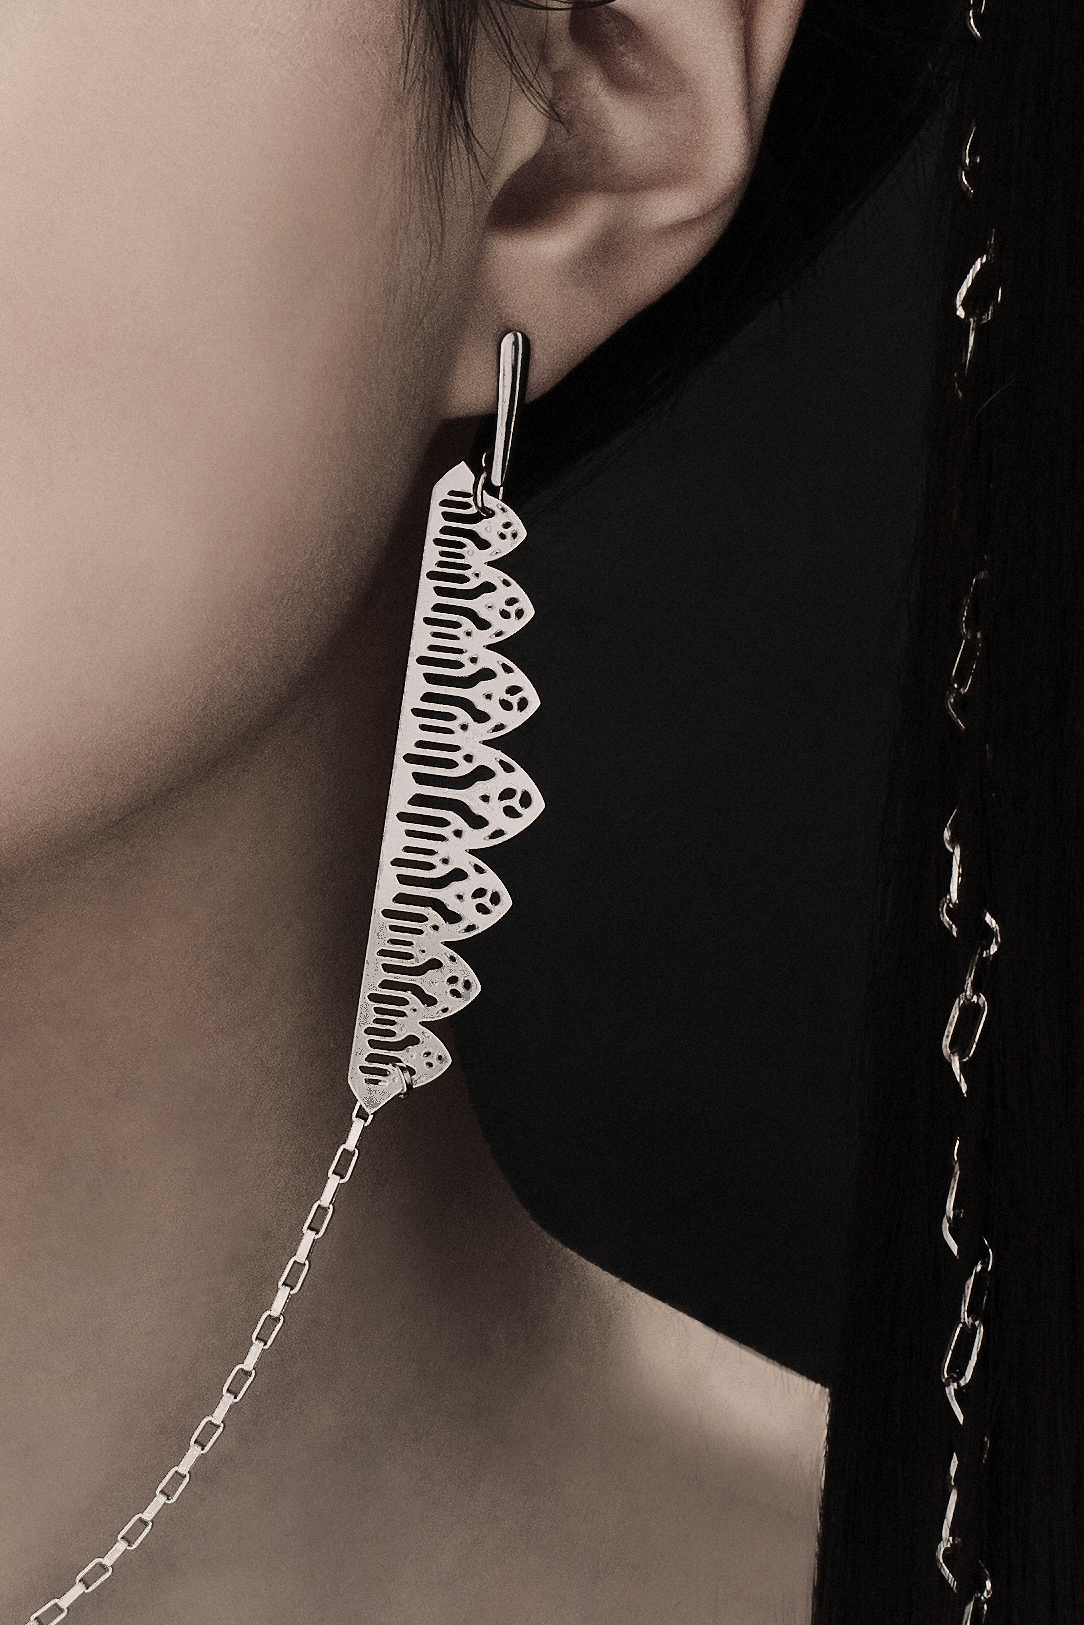 A close up detail of this distinctive single-piece Myril Jewels earring, with an intricate silver design, spans from one ear to the other with a delicate connecting chain. It embodies the essence of neo-gothic elegance, making it an ideal accessory for minimal goth everyday wear, or as a standout piece for rave parties. This earring captures the gothic-chic trend and is a unique gift idea for those with a love for bold, alternative jewelry